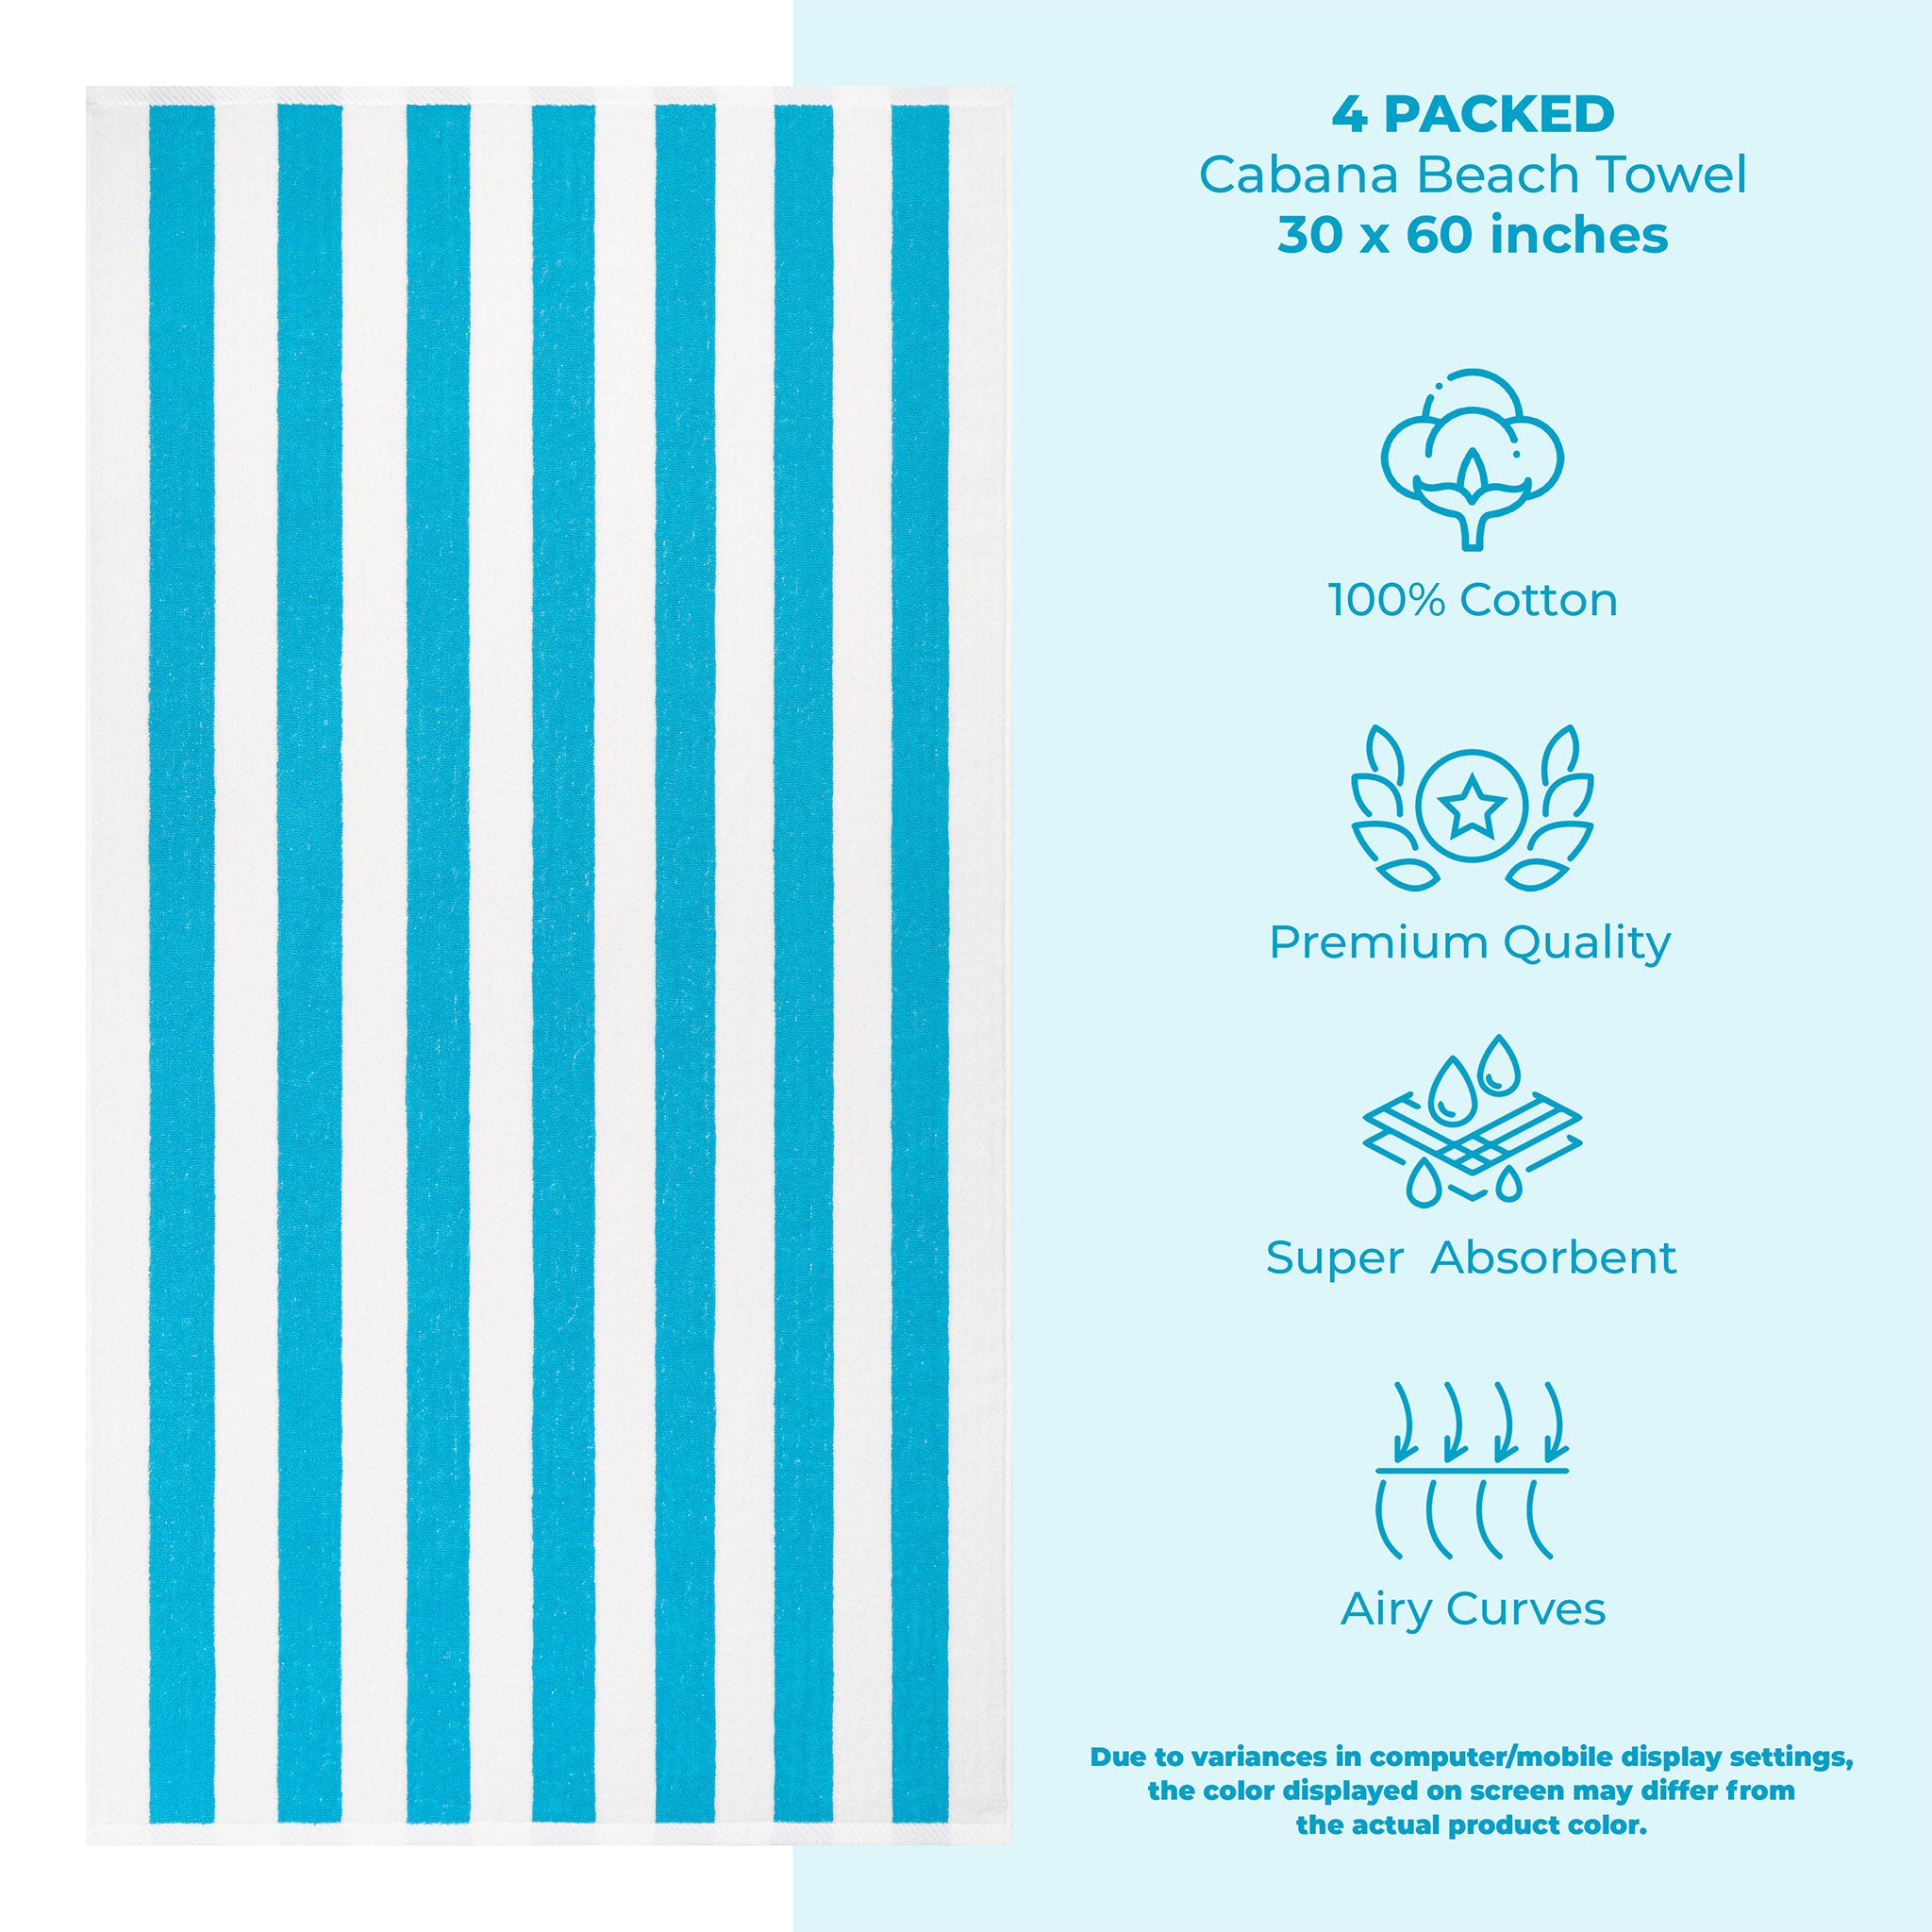 American Soft Linen 100% Cotton 4 Pack Beach Towels Cabana Striped Pool Towels -turquoise-blue-3